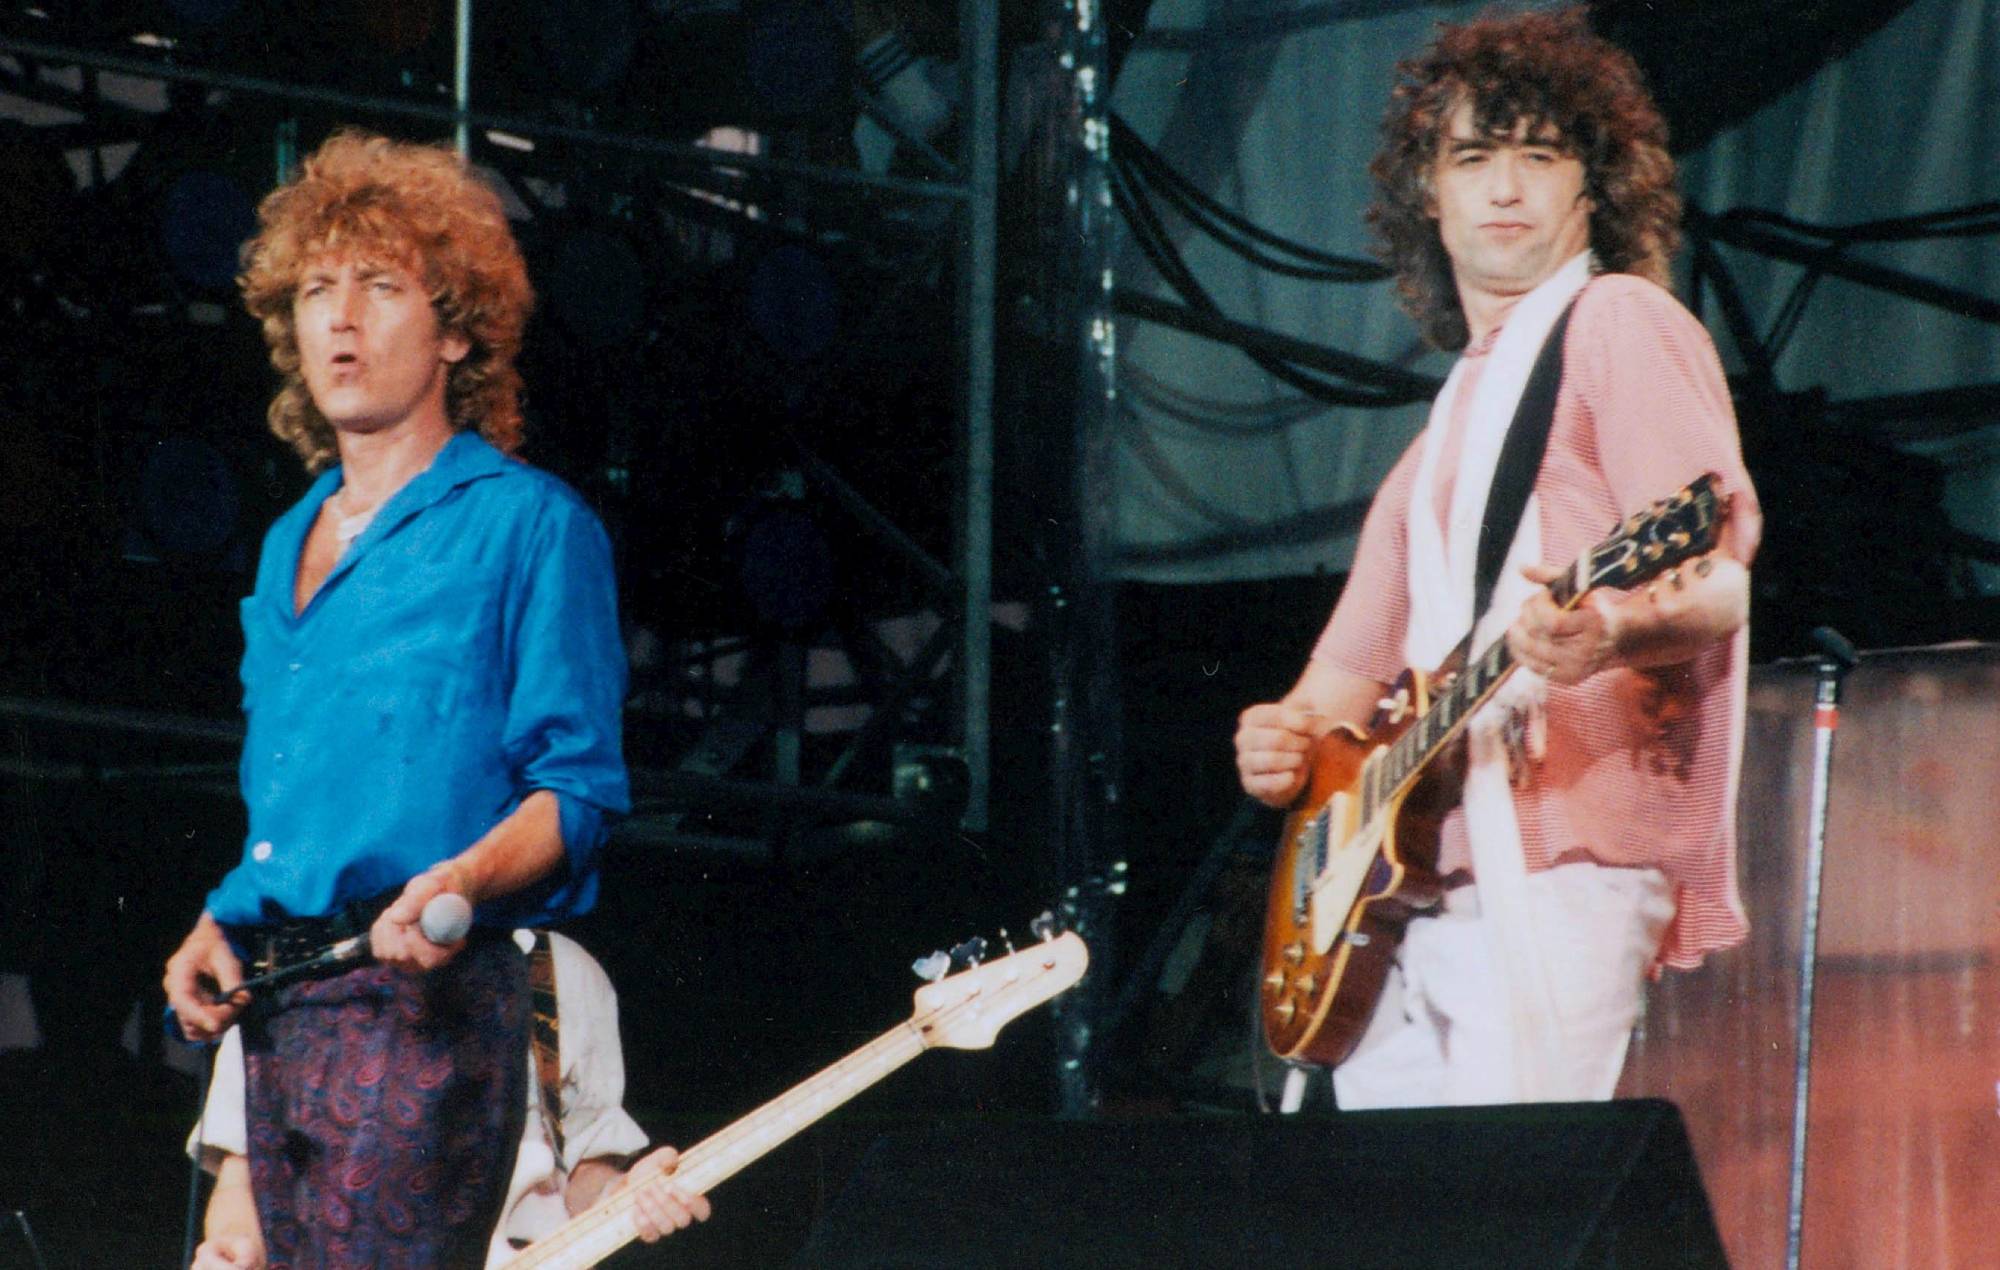 Jimmy Page enlisting Phil Collins on drums for Led Zep's Live Aid set